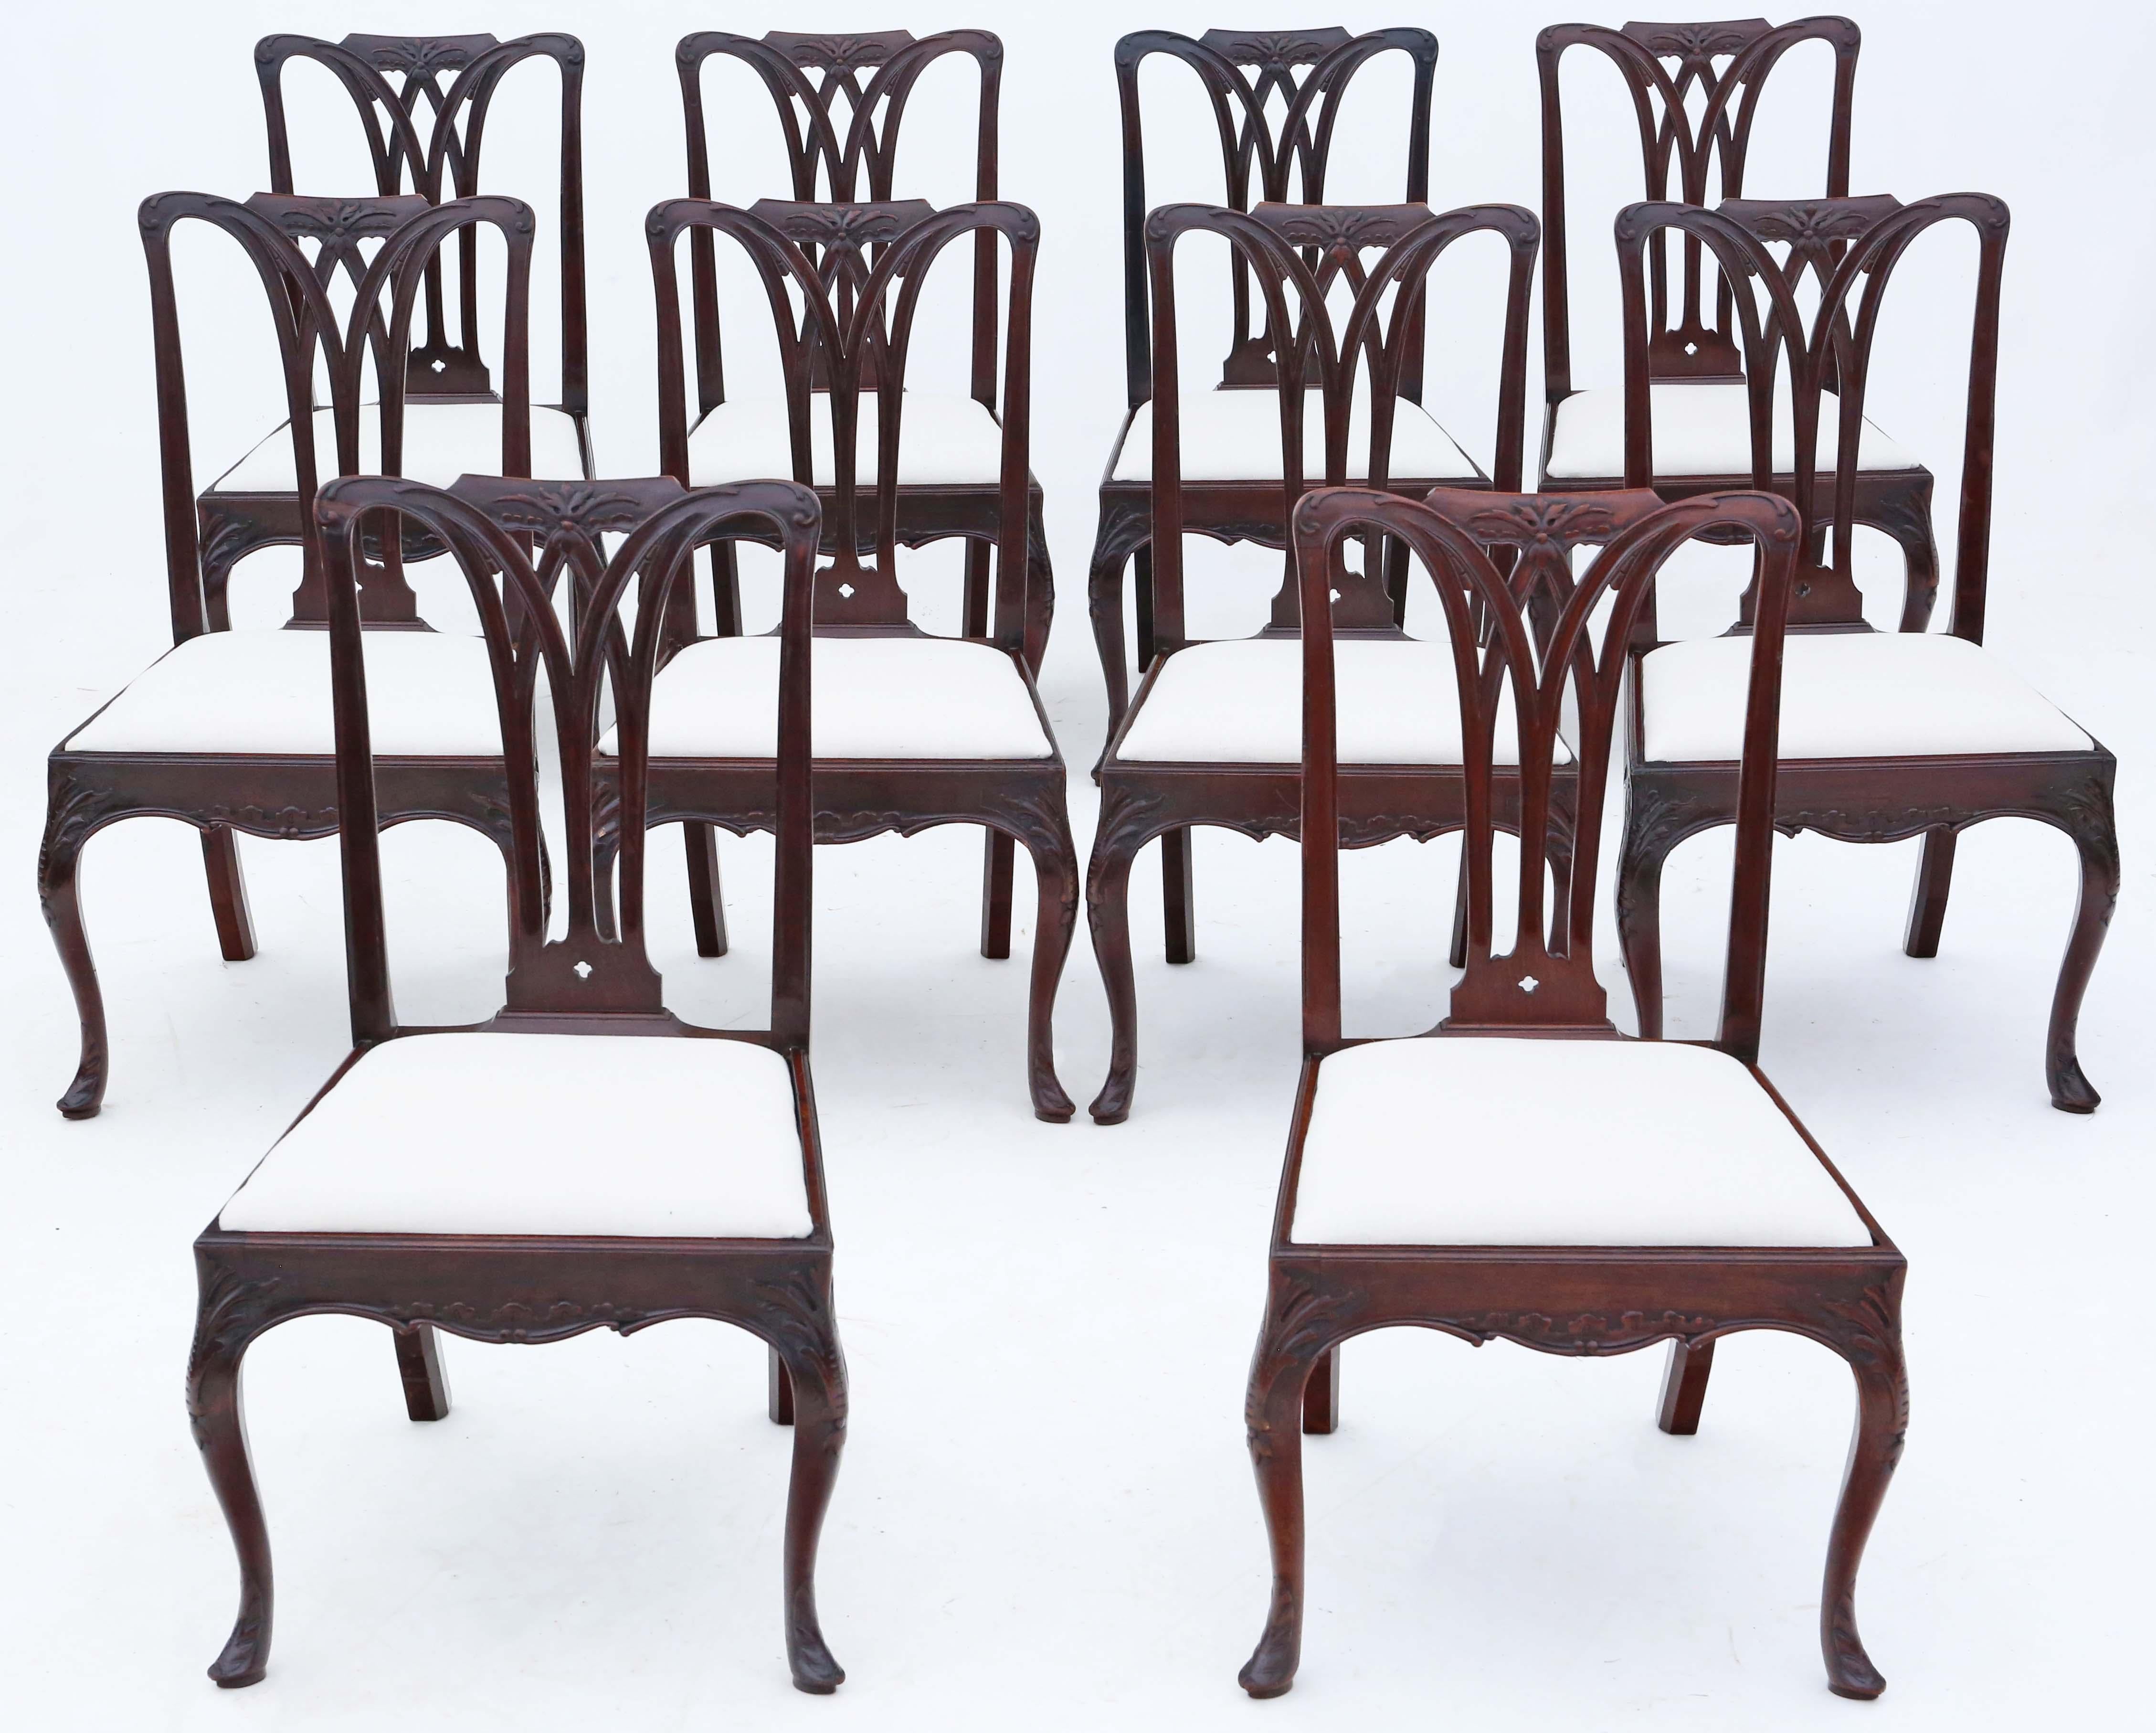 Antique fine quality set of 10 18th century Georgian carved mahogany (probably Cuban) dining chairs. Very rare, with an elegant design and lovely carved cabriole legs, terminating in cloven hooves!

Beautifully detailed prolific fine hand